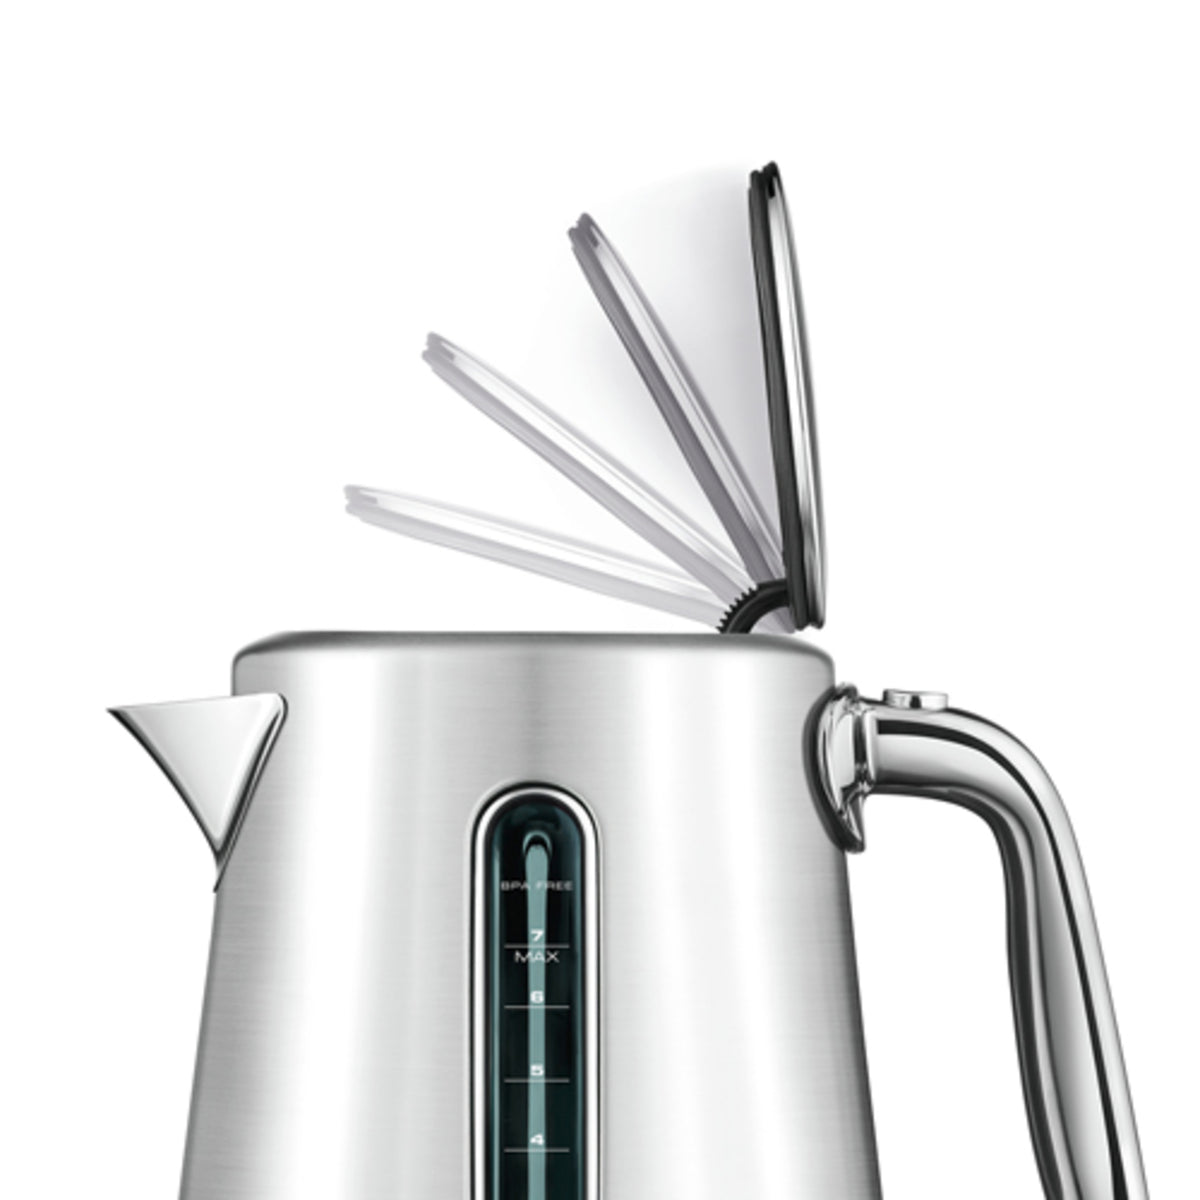 Smart Kettle Luxe with Temperature Control